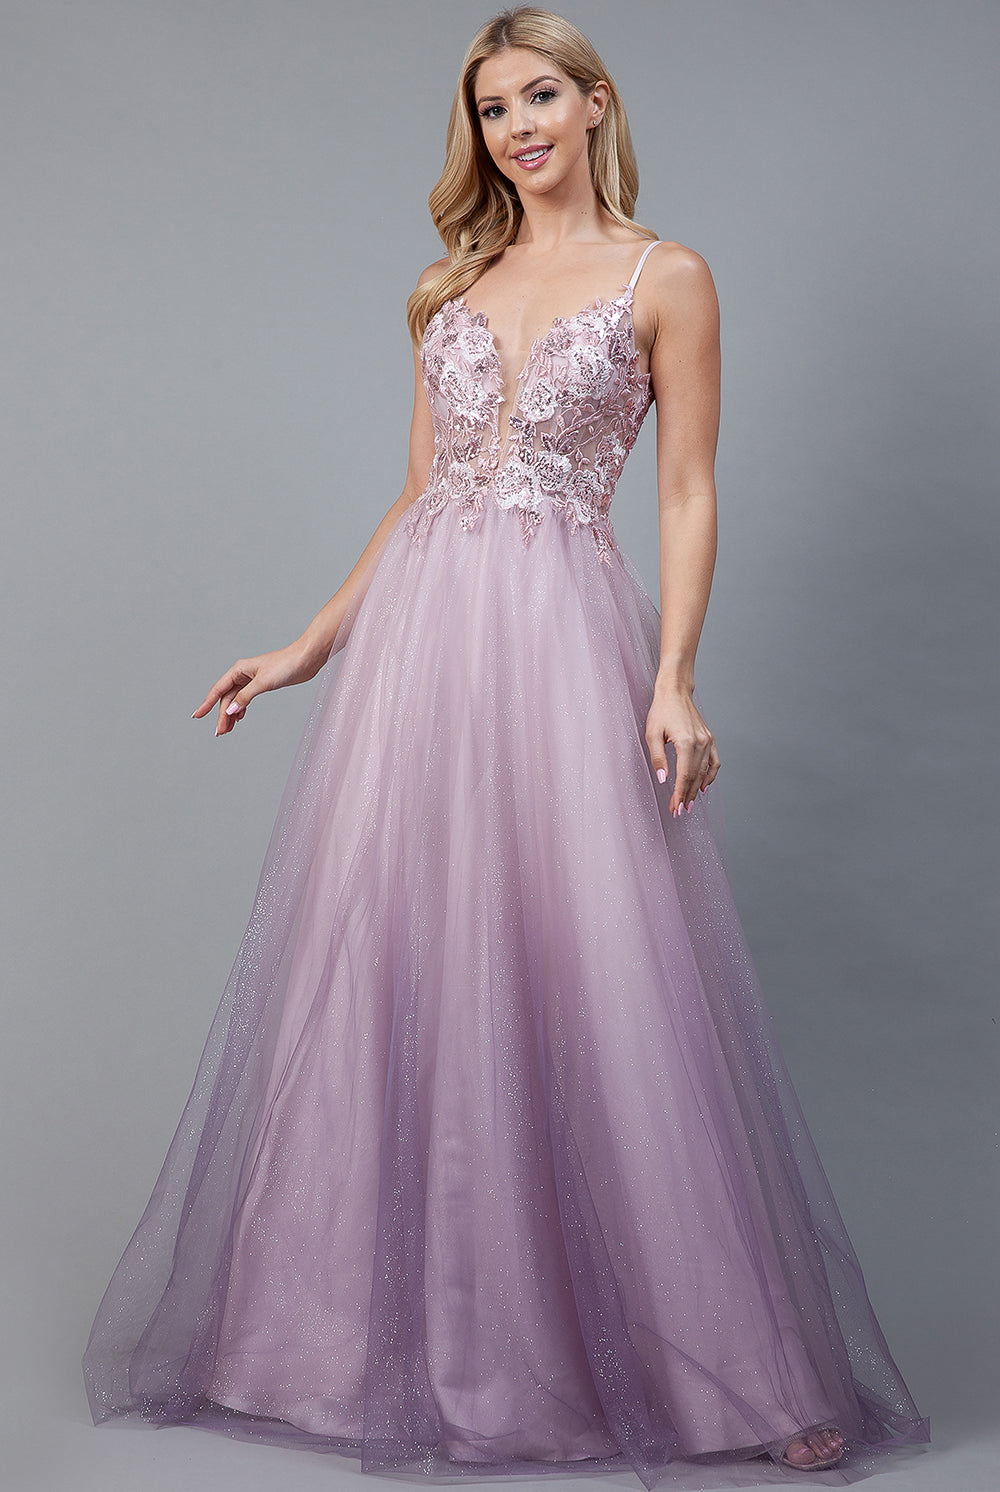 Embroidered Lace Bodice, Glittering Tulle Skirt, Long Prom Dress-smcdress